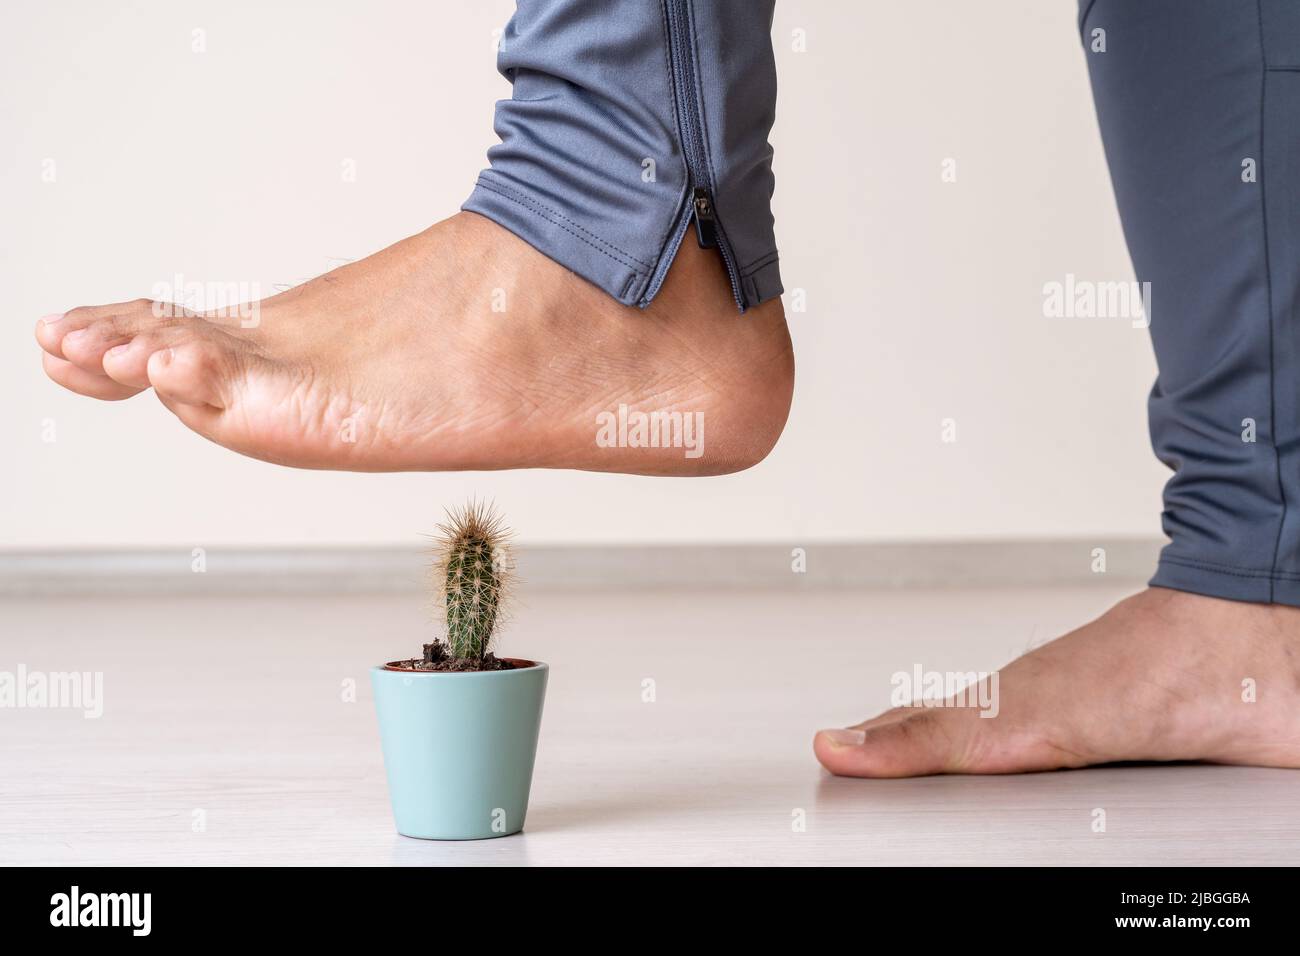 Close up photo of moment foot stepping on cactus plant as a symbol of common human foot problems. Stock Photo